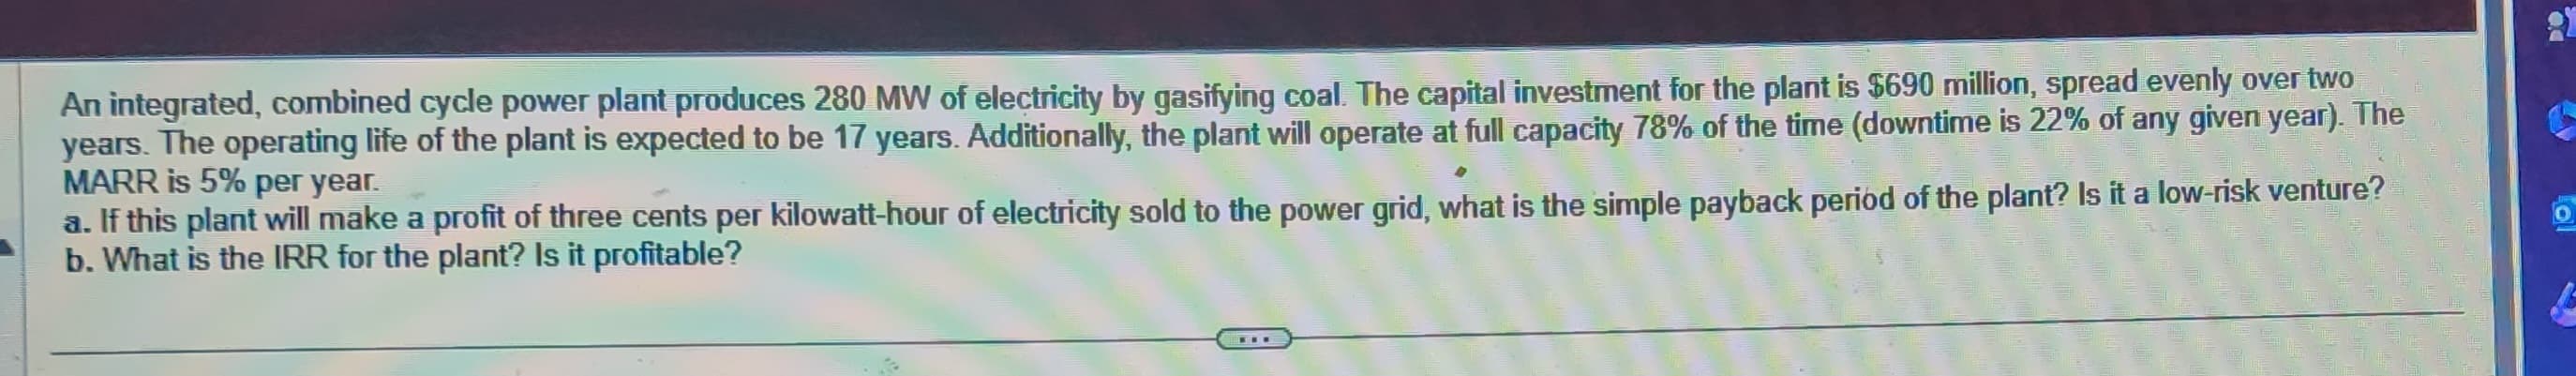 An integrated, combined cycle power plant produces 280 MW of electricity by gasifying coal. The capital investment for the plant is $690 million, spread evenly over two
years. The operating life of the plant is expected to be 17 years. Additionally, the plant will operate at full capacity 78% of the time (downtime is 22% of any given year). The
MARR is 5% per year.
a. If this plant will make a profit of three cents per kilowatt-hour of electricity sold to the power grid, what is the simple payback period of the plant? Is it a low-risk venture?
b. What is the IRR for the plant? Is it profitable?
O